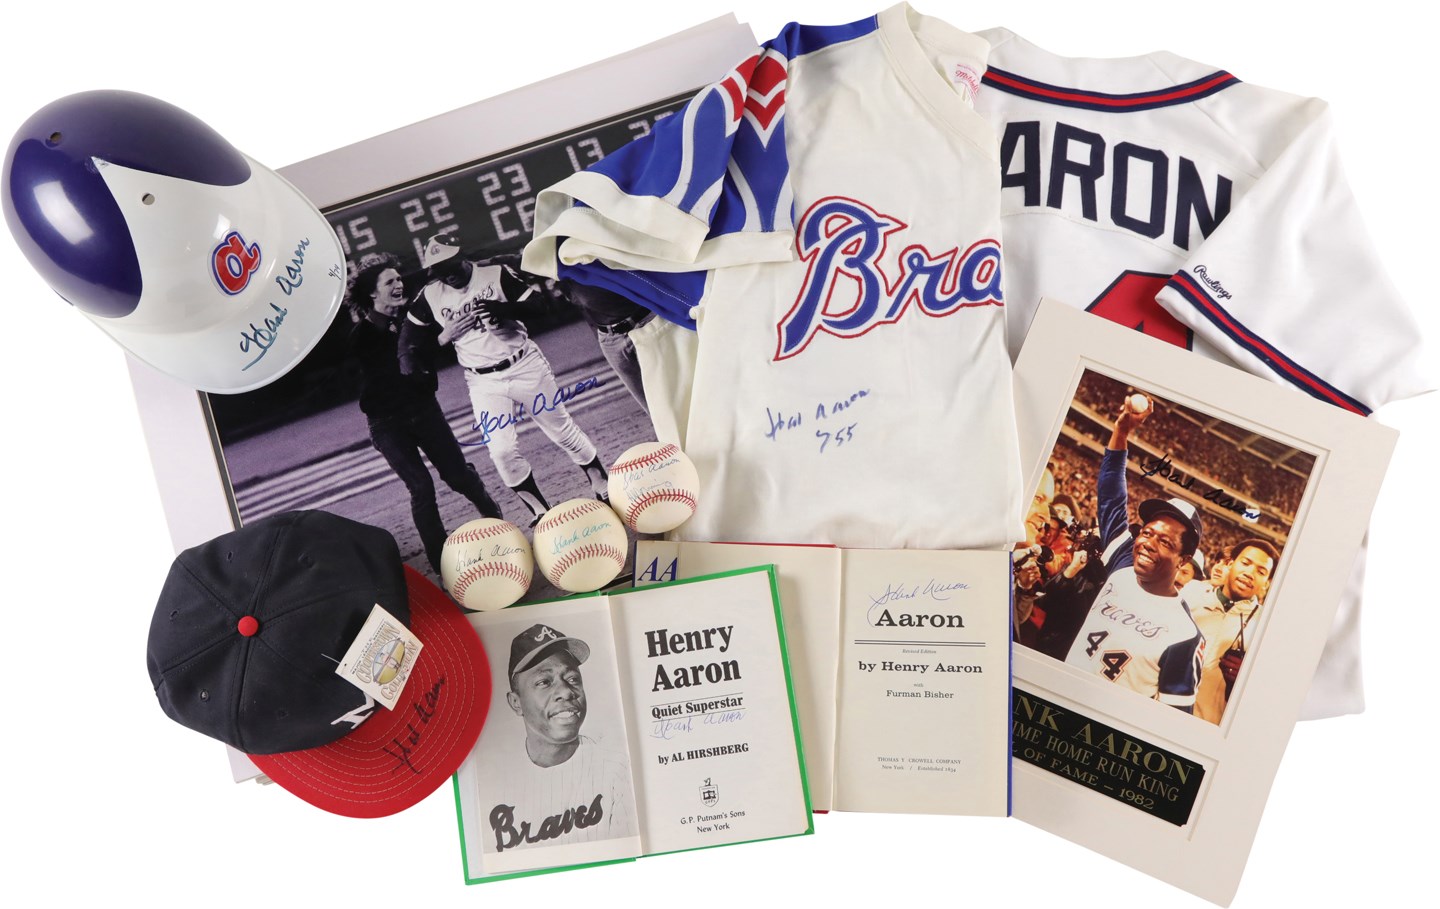 Enormous Hank Aaron Autograph Collection Including Jerseys, Helmet, Balls, Contract, and Photos (16) (w/PSA)